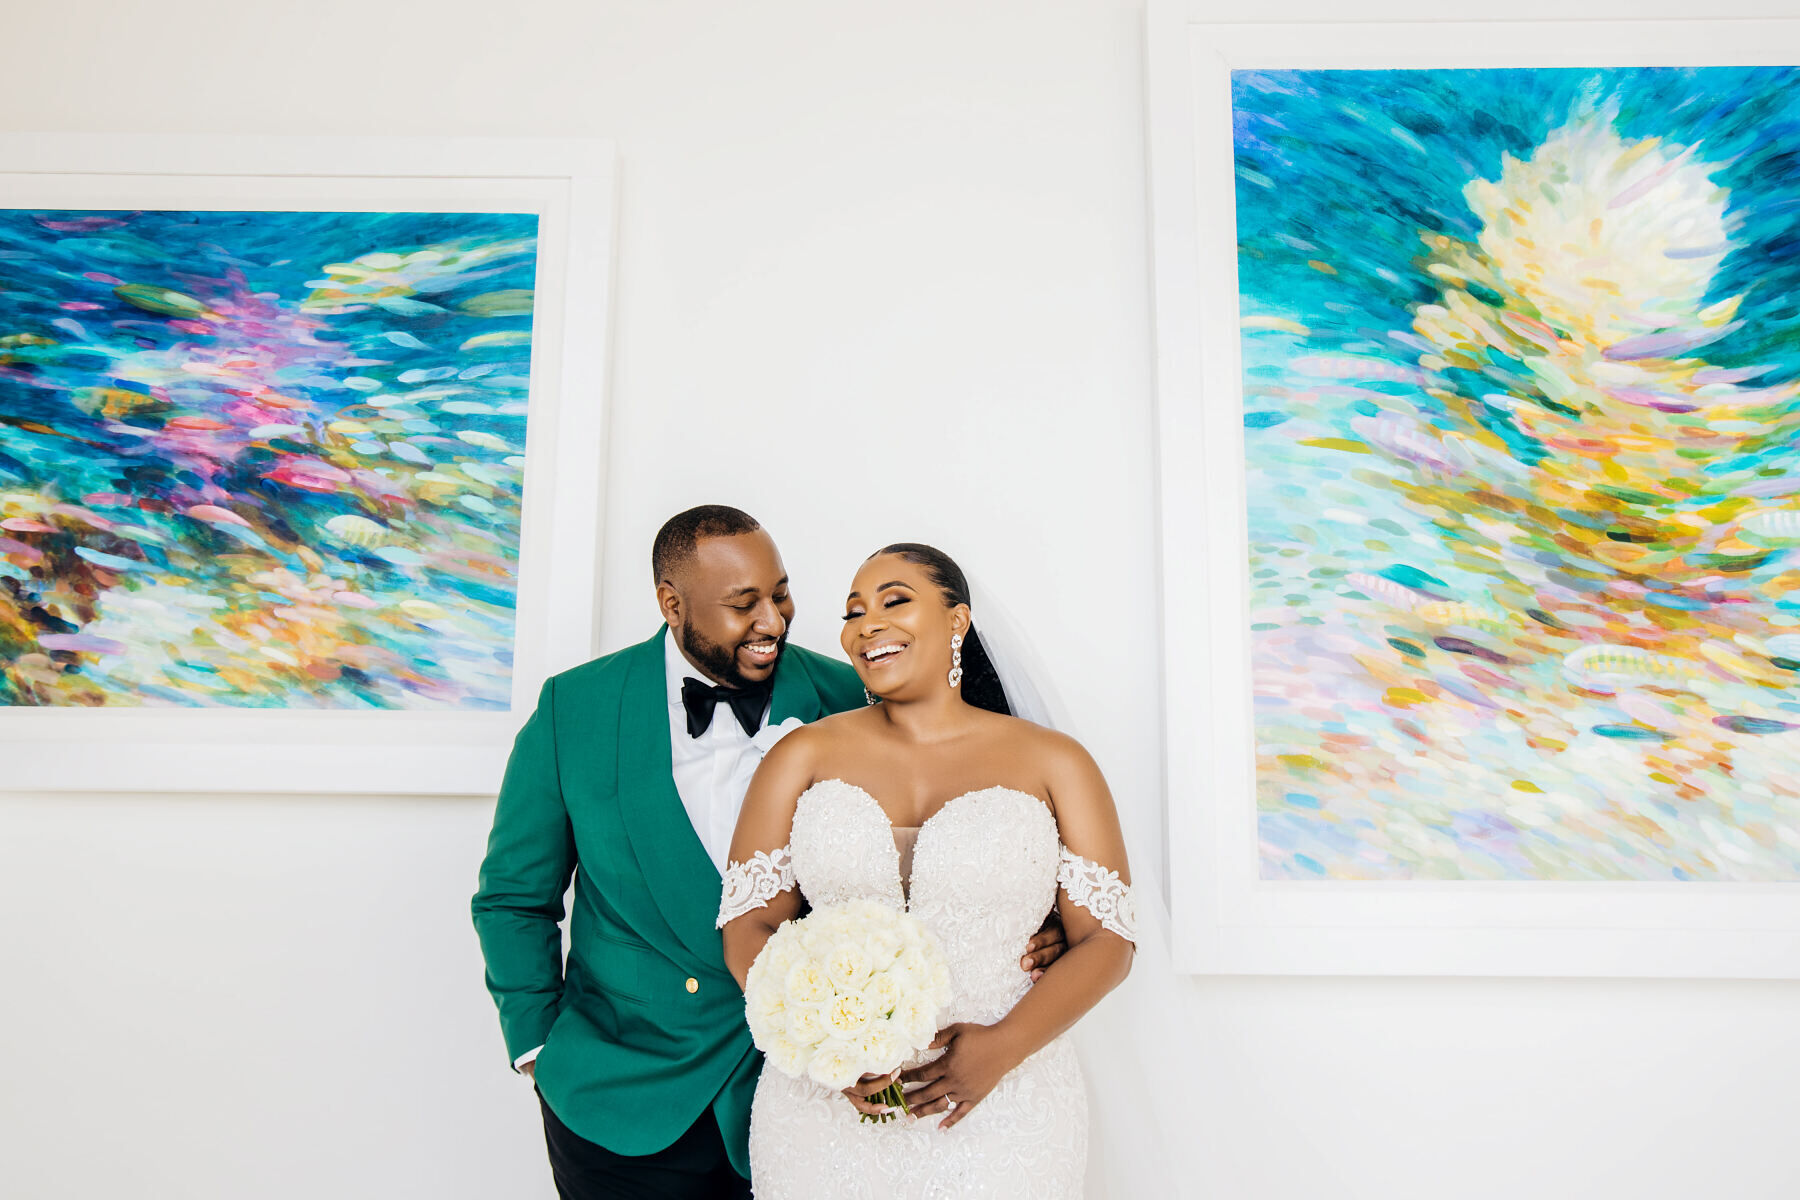 Wedding Website Examples: A bride and groom laughing while posing in front of two art pieces.